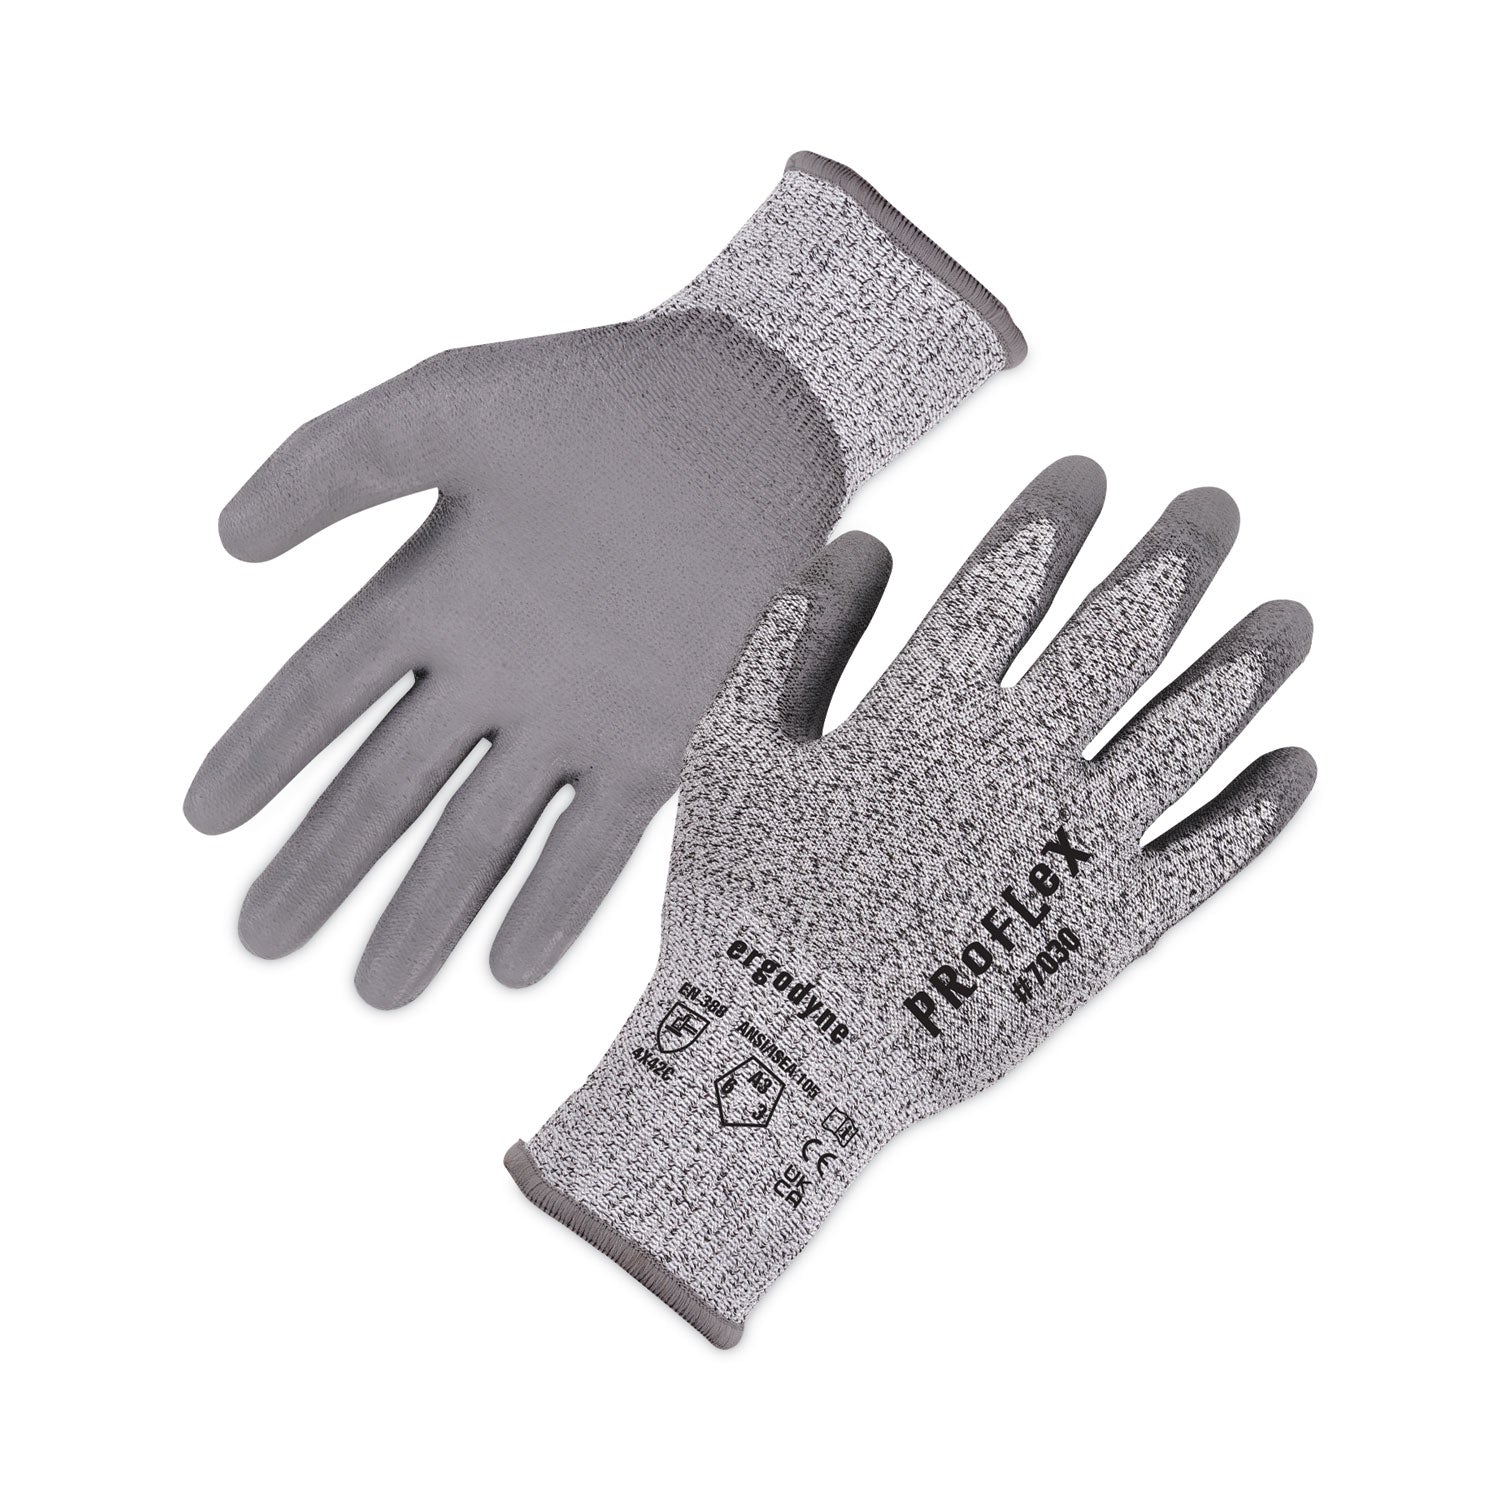 proflex-7030-ansi-a3-pu-coated-cr-gloves-gray-2x-large-12-pairs-pack-ships-in-1-3-business-days_ego10456 - 1